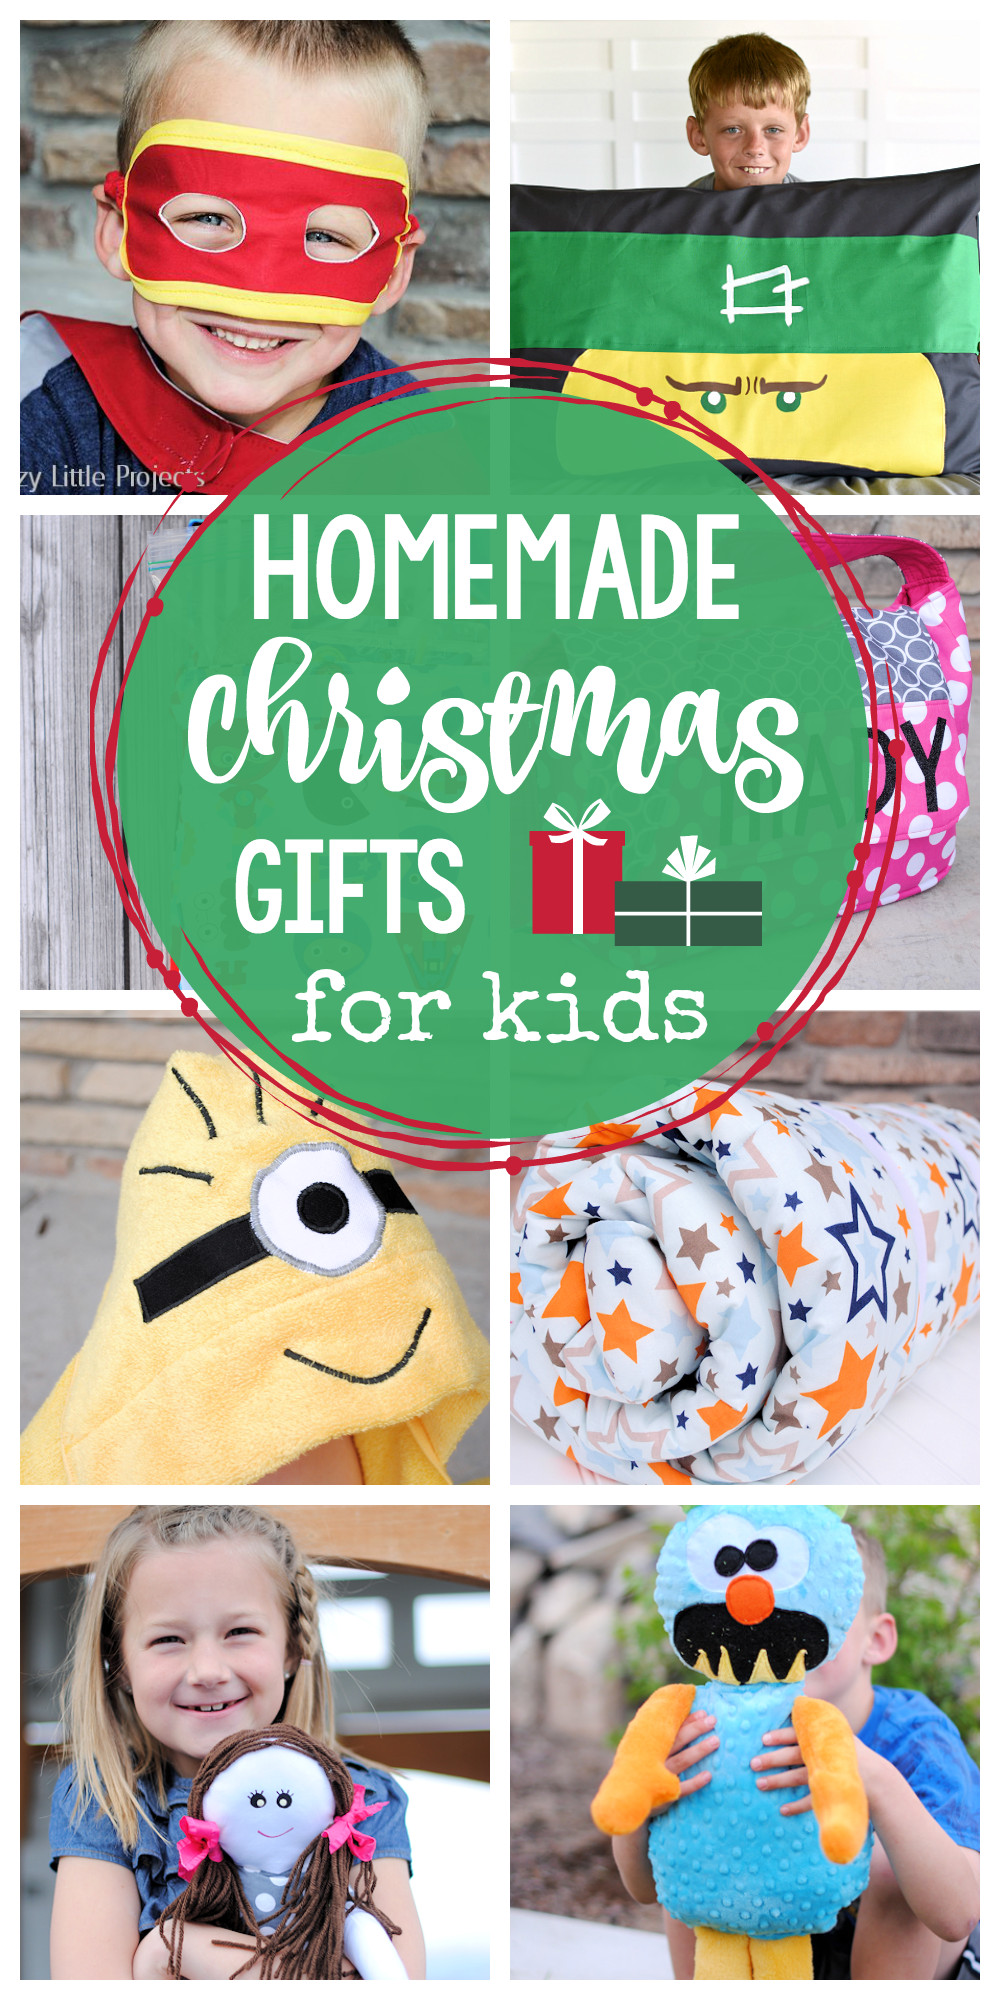 Homemade Gifts For Children
 25 Homemade Christmas Gifts for Kids Crazy Little Projects